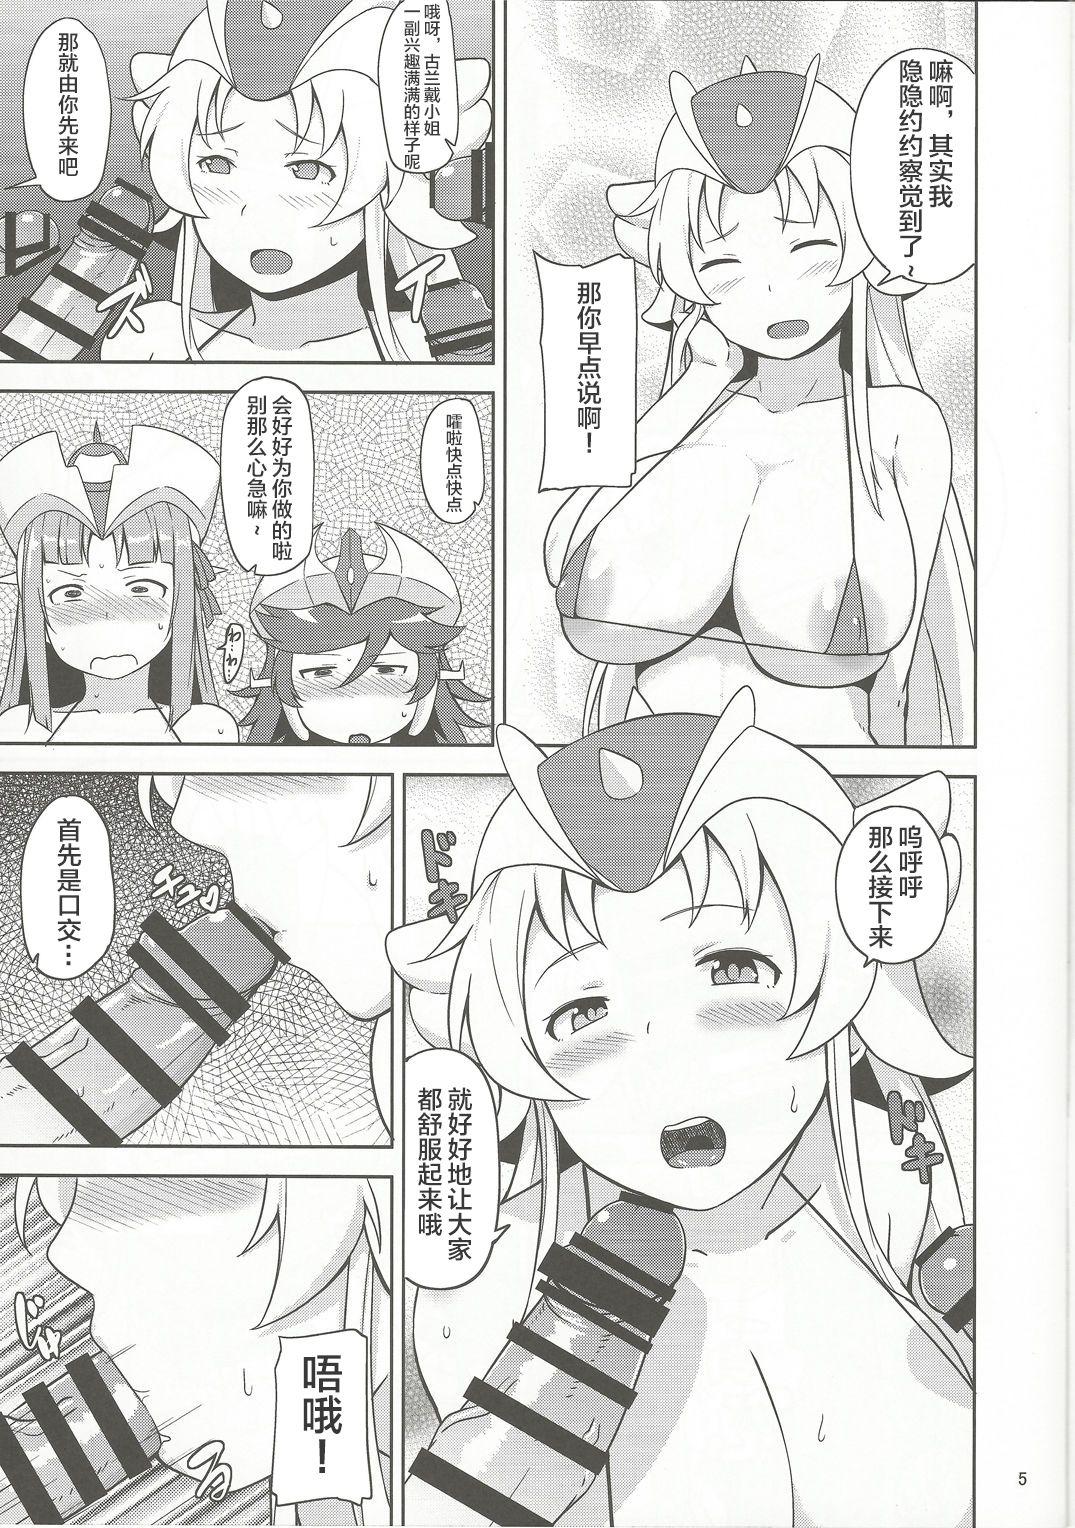 Leaked RGH - Robot girls z Scene - Page 4